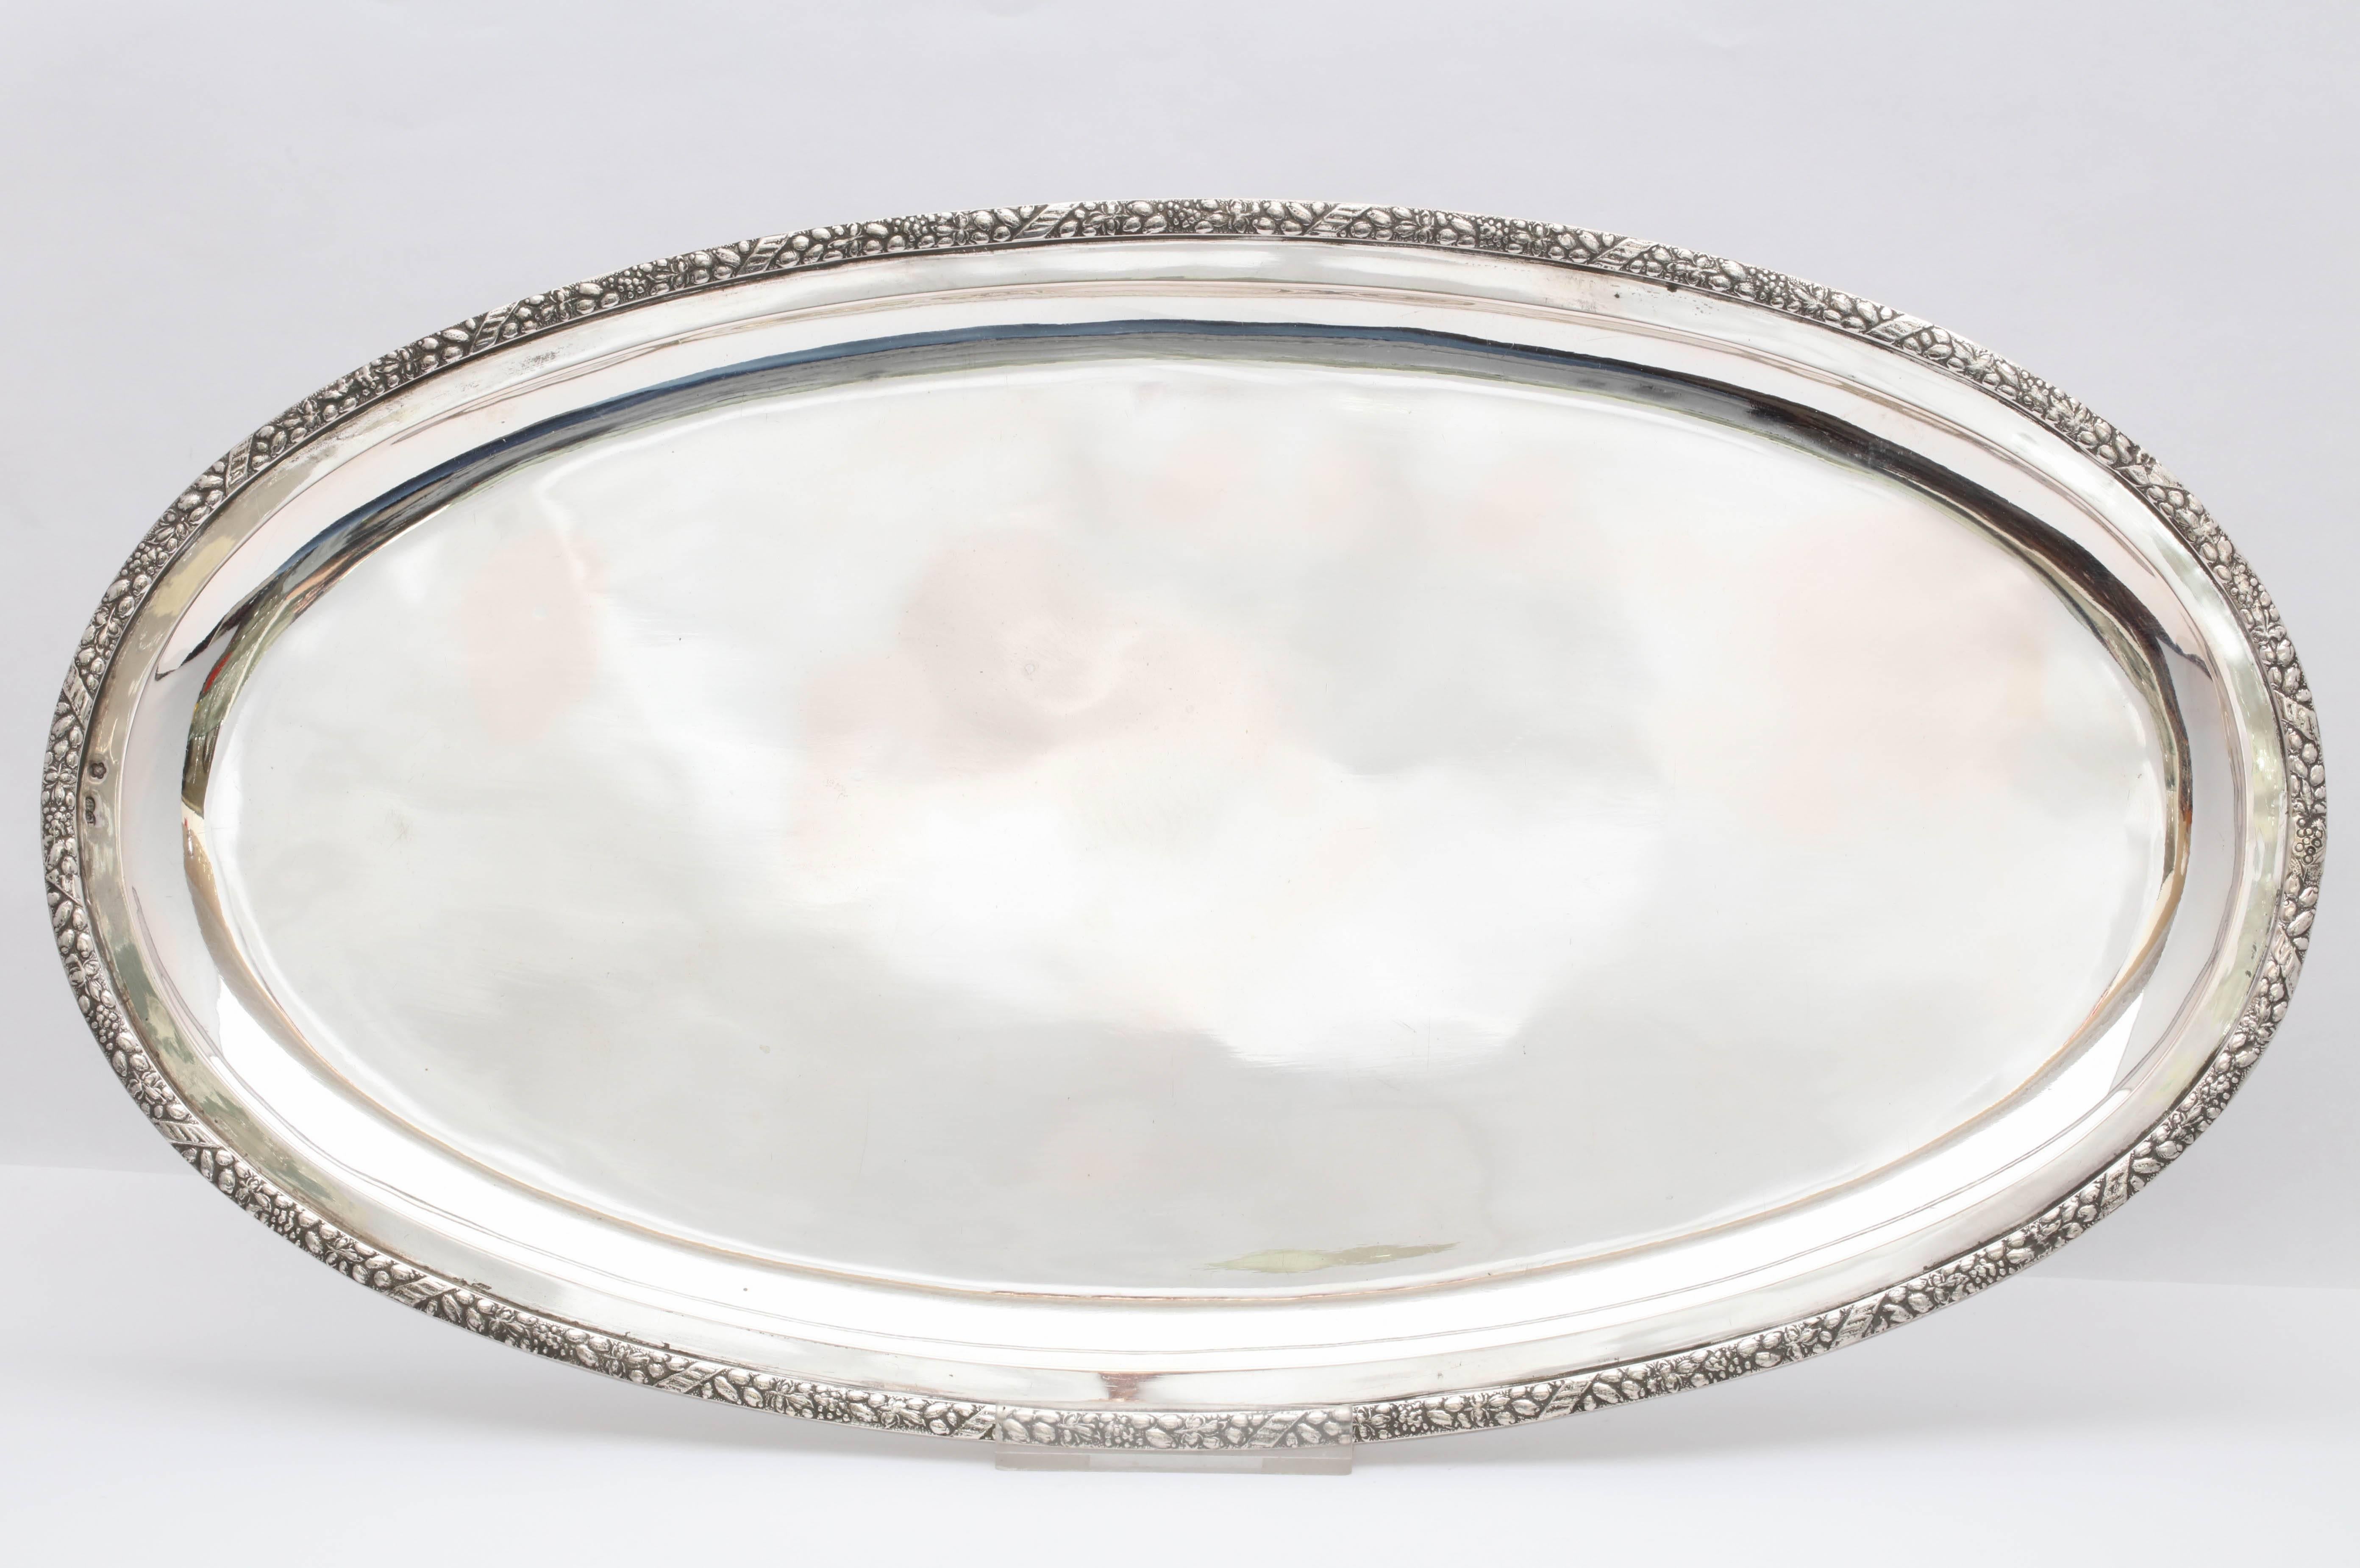 Victorian style, continental silver ‘.835’ oval serving or table platter, Austria, circa 1910. Measures: 14 1/2 inches long x 8 1/8 inches deep x 1/2 inch high. Weighs 16.895 Troy ounces. Can also be used on a dressing table. Dark spots in photos